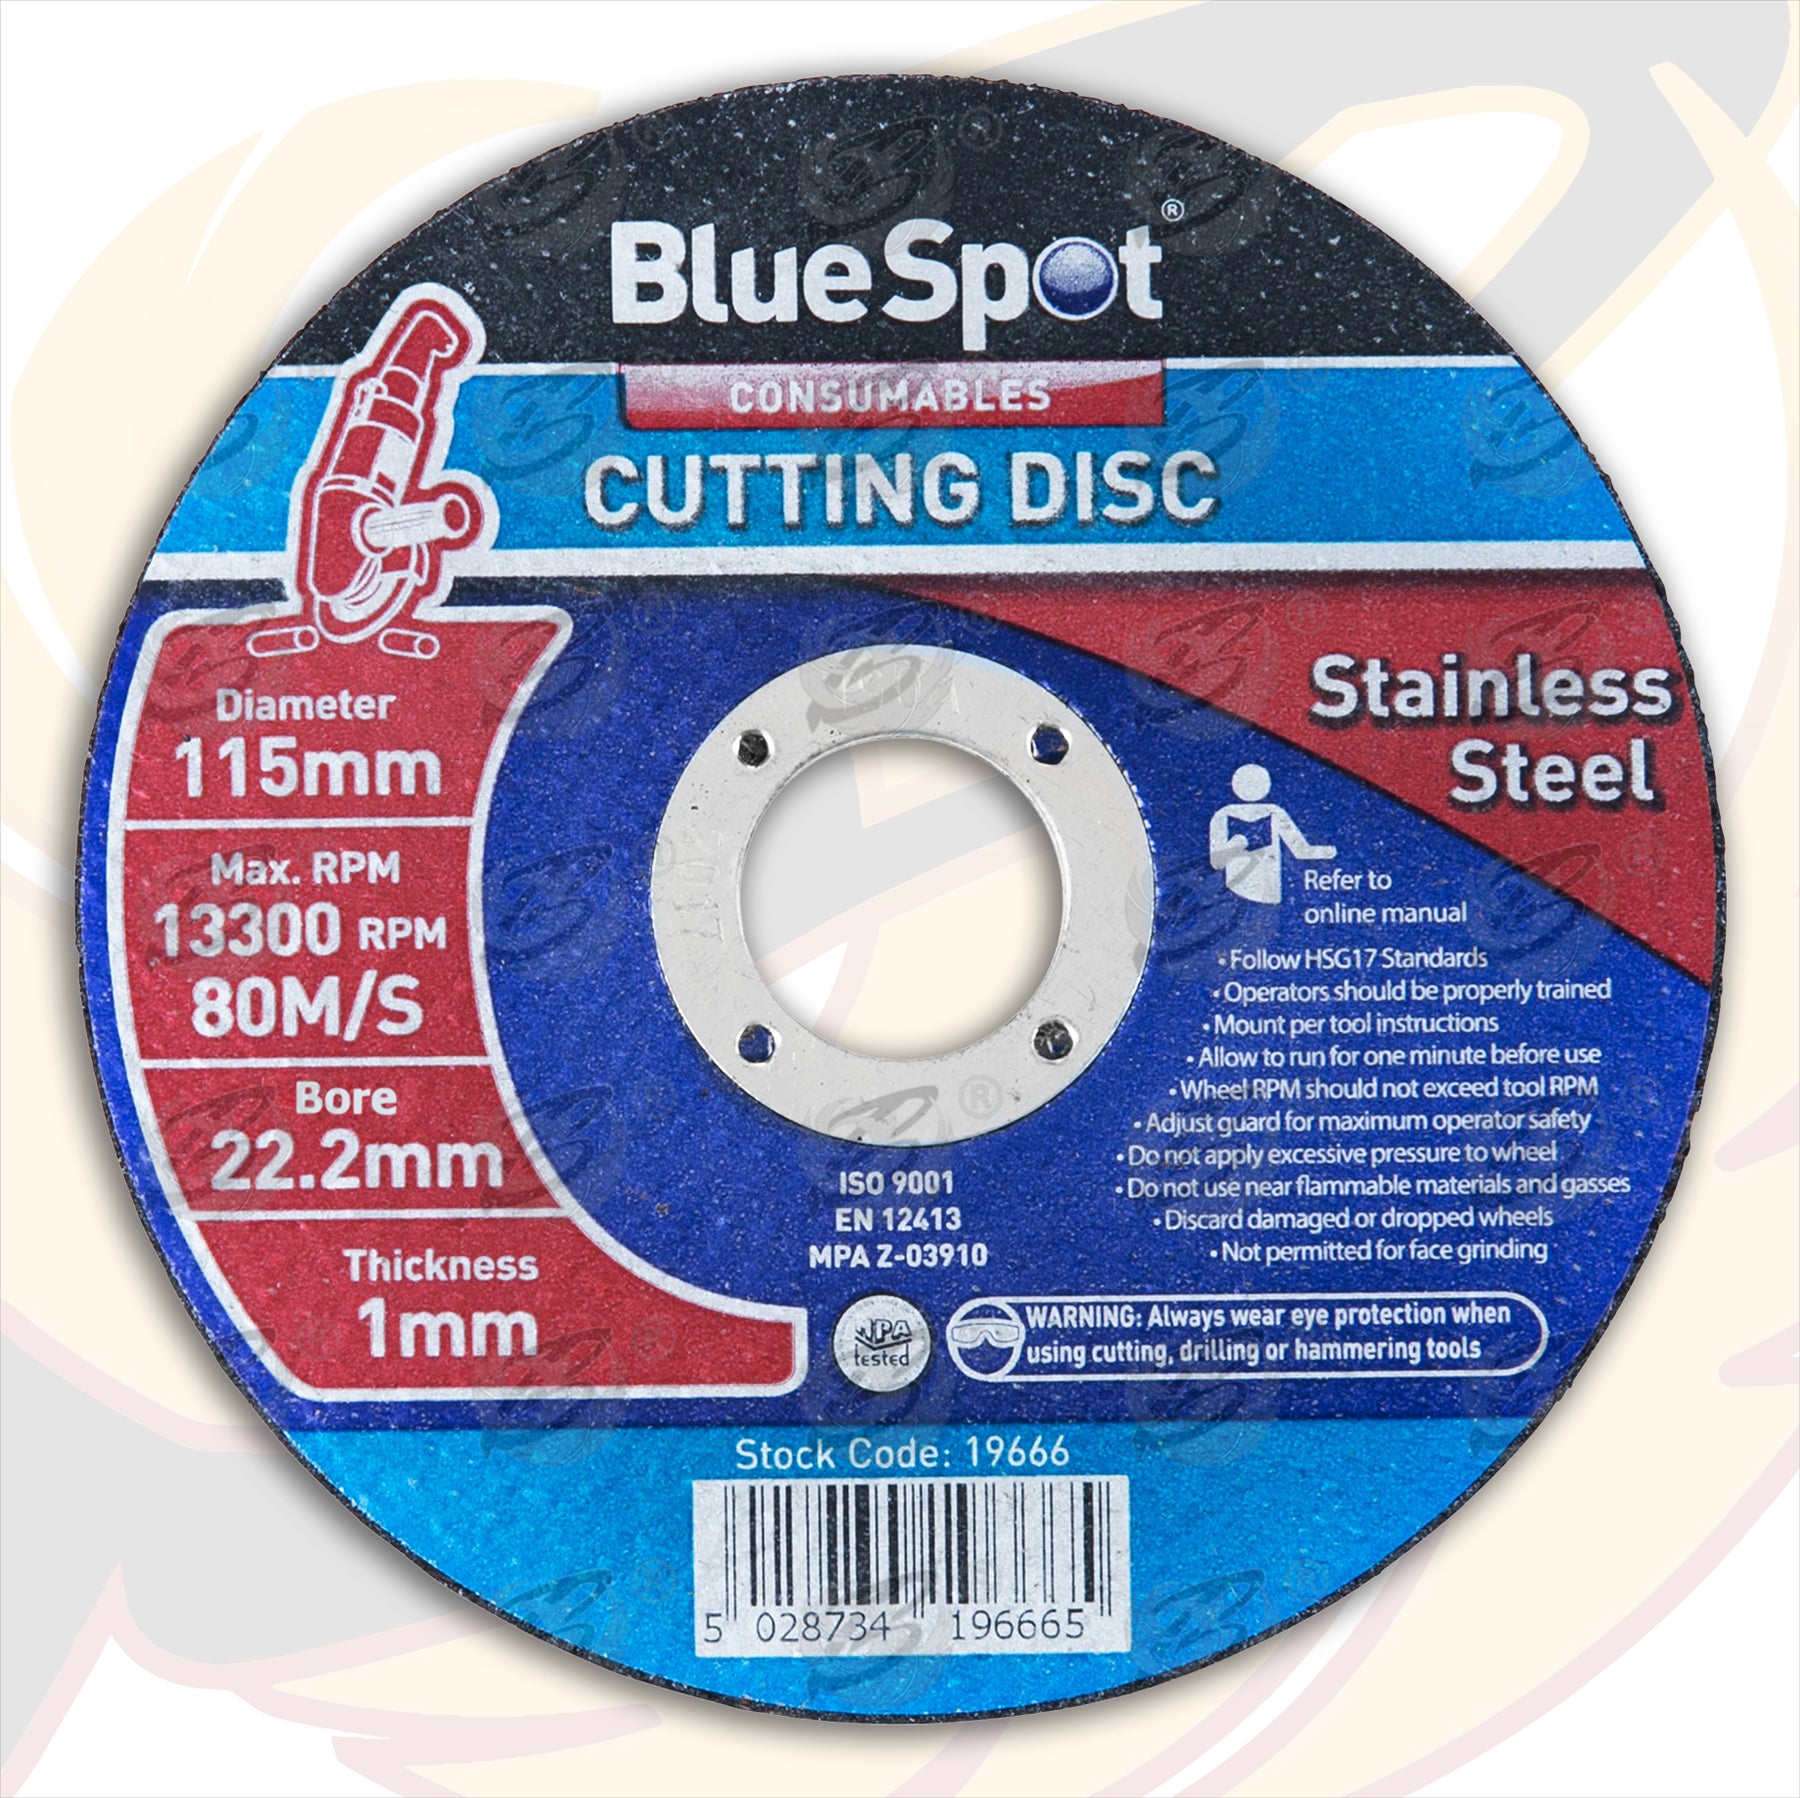 BLUESPOT 1MM THICK STAINLESS STEEL CUTTING DISCS ( X 10 DISCS )